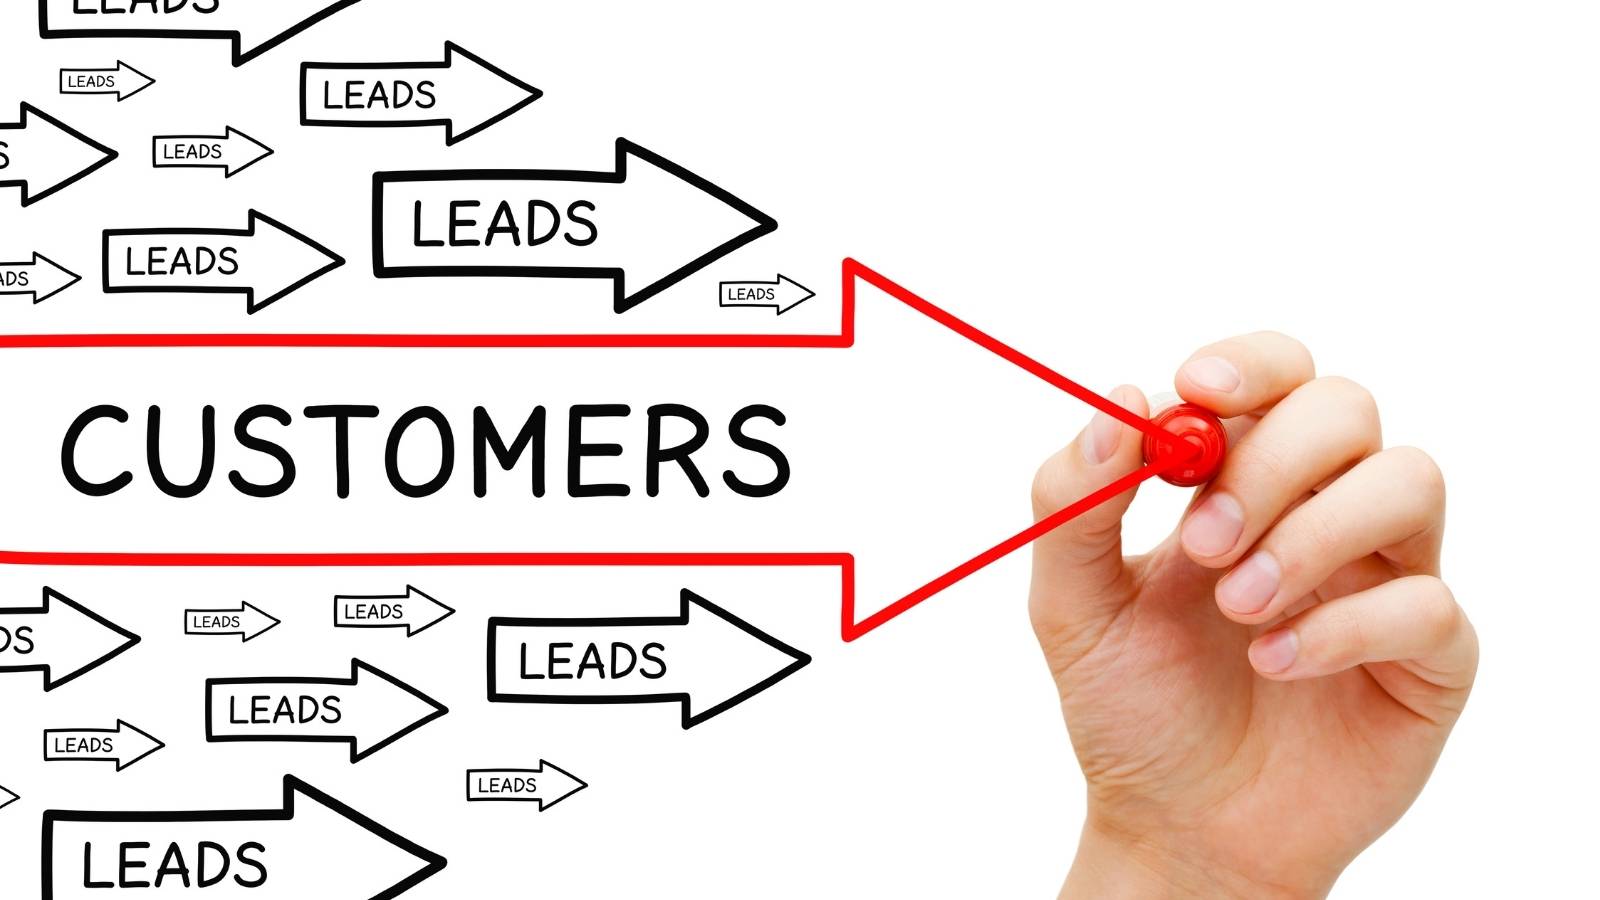 Why Sales Lead Management Software are Crucial for Small Businesses